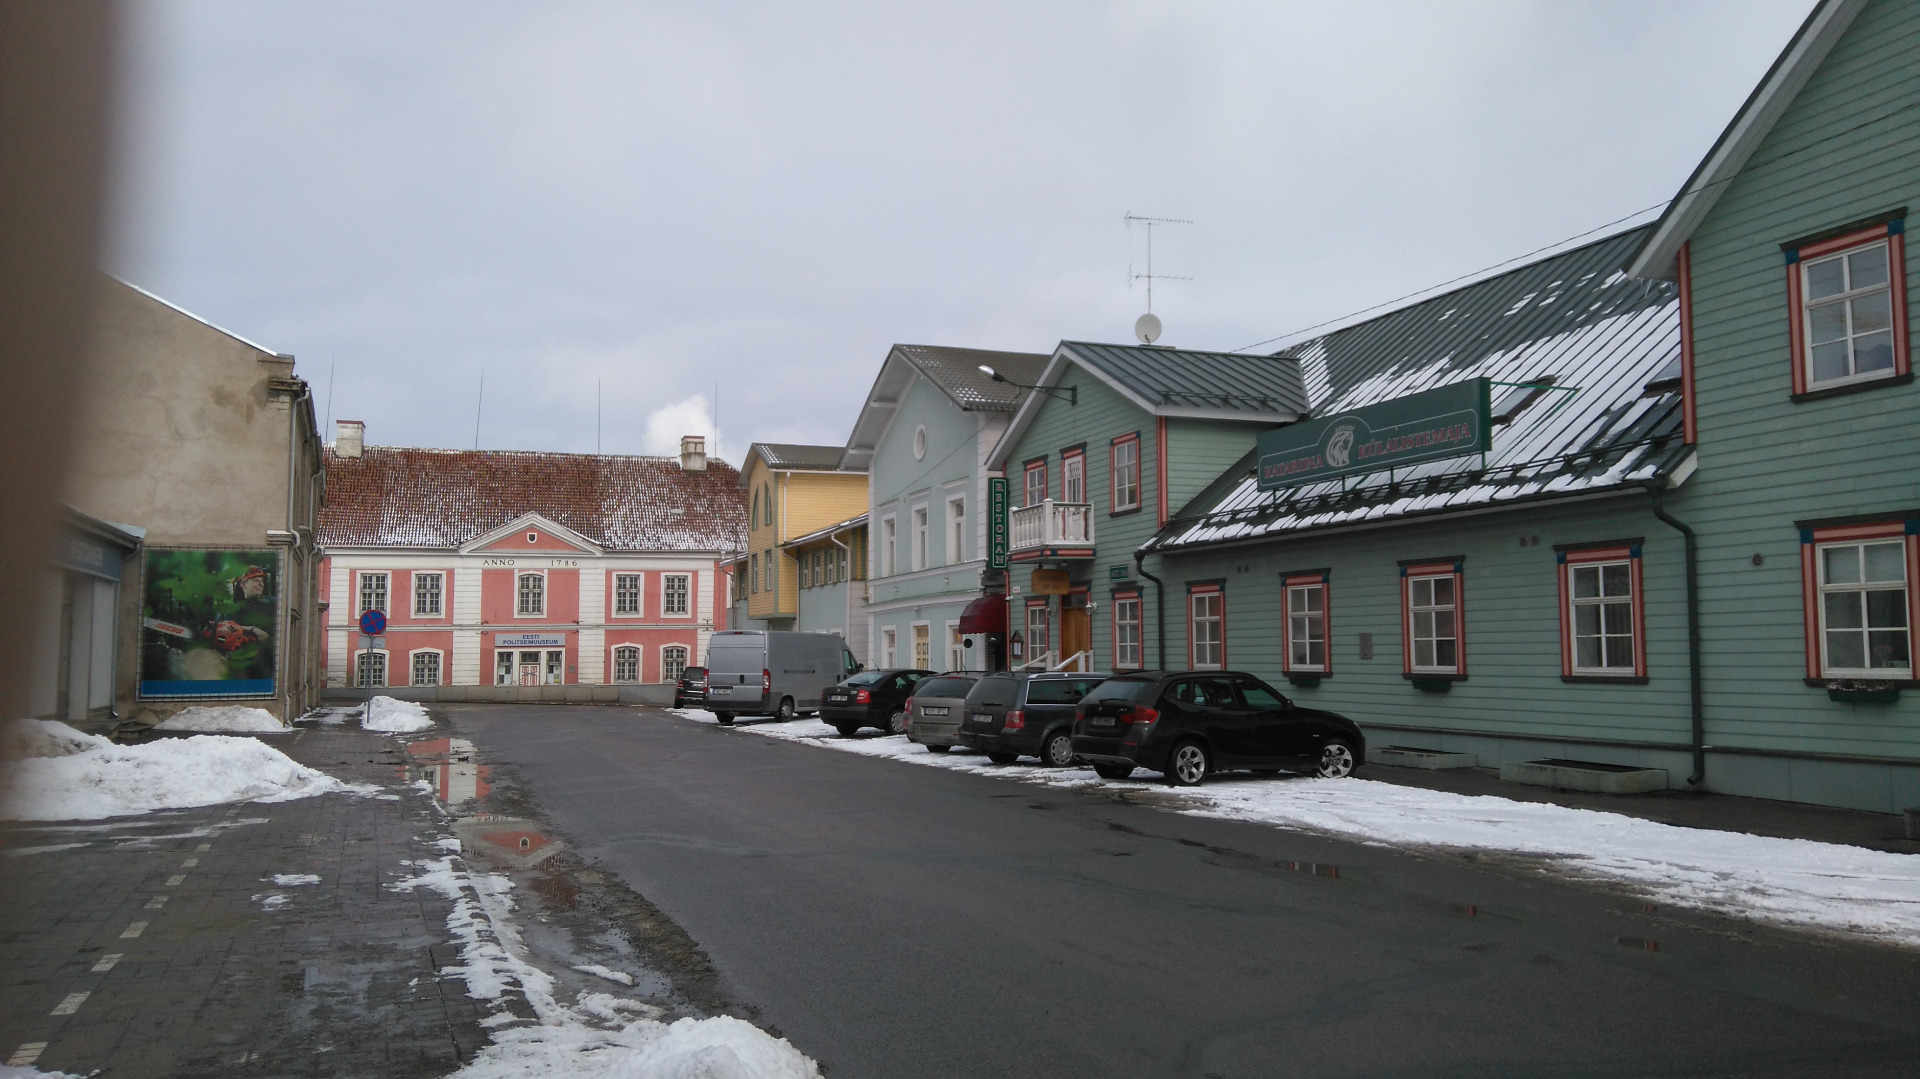 Beginning of a long street in Rakvere rephoto